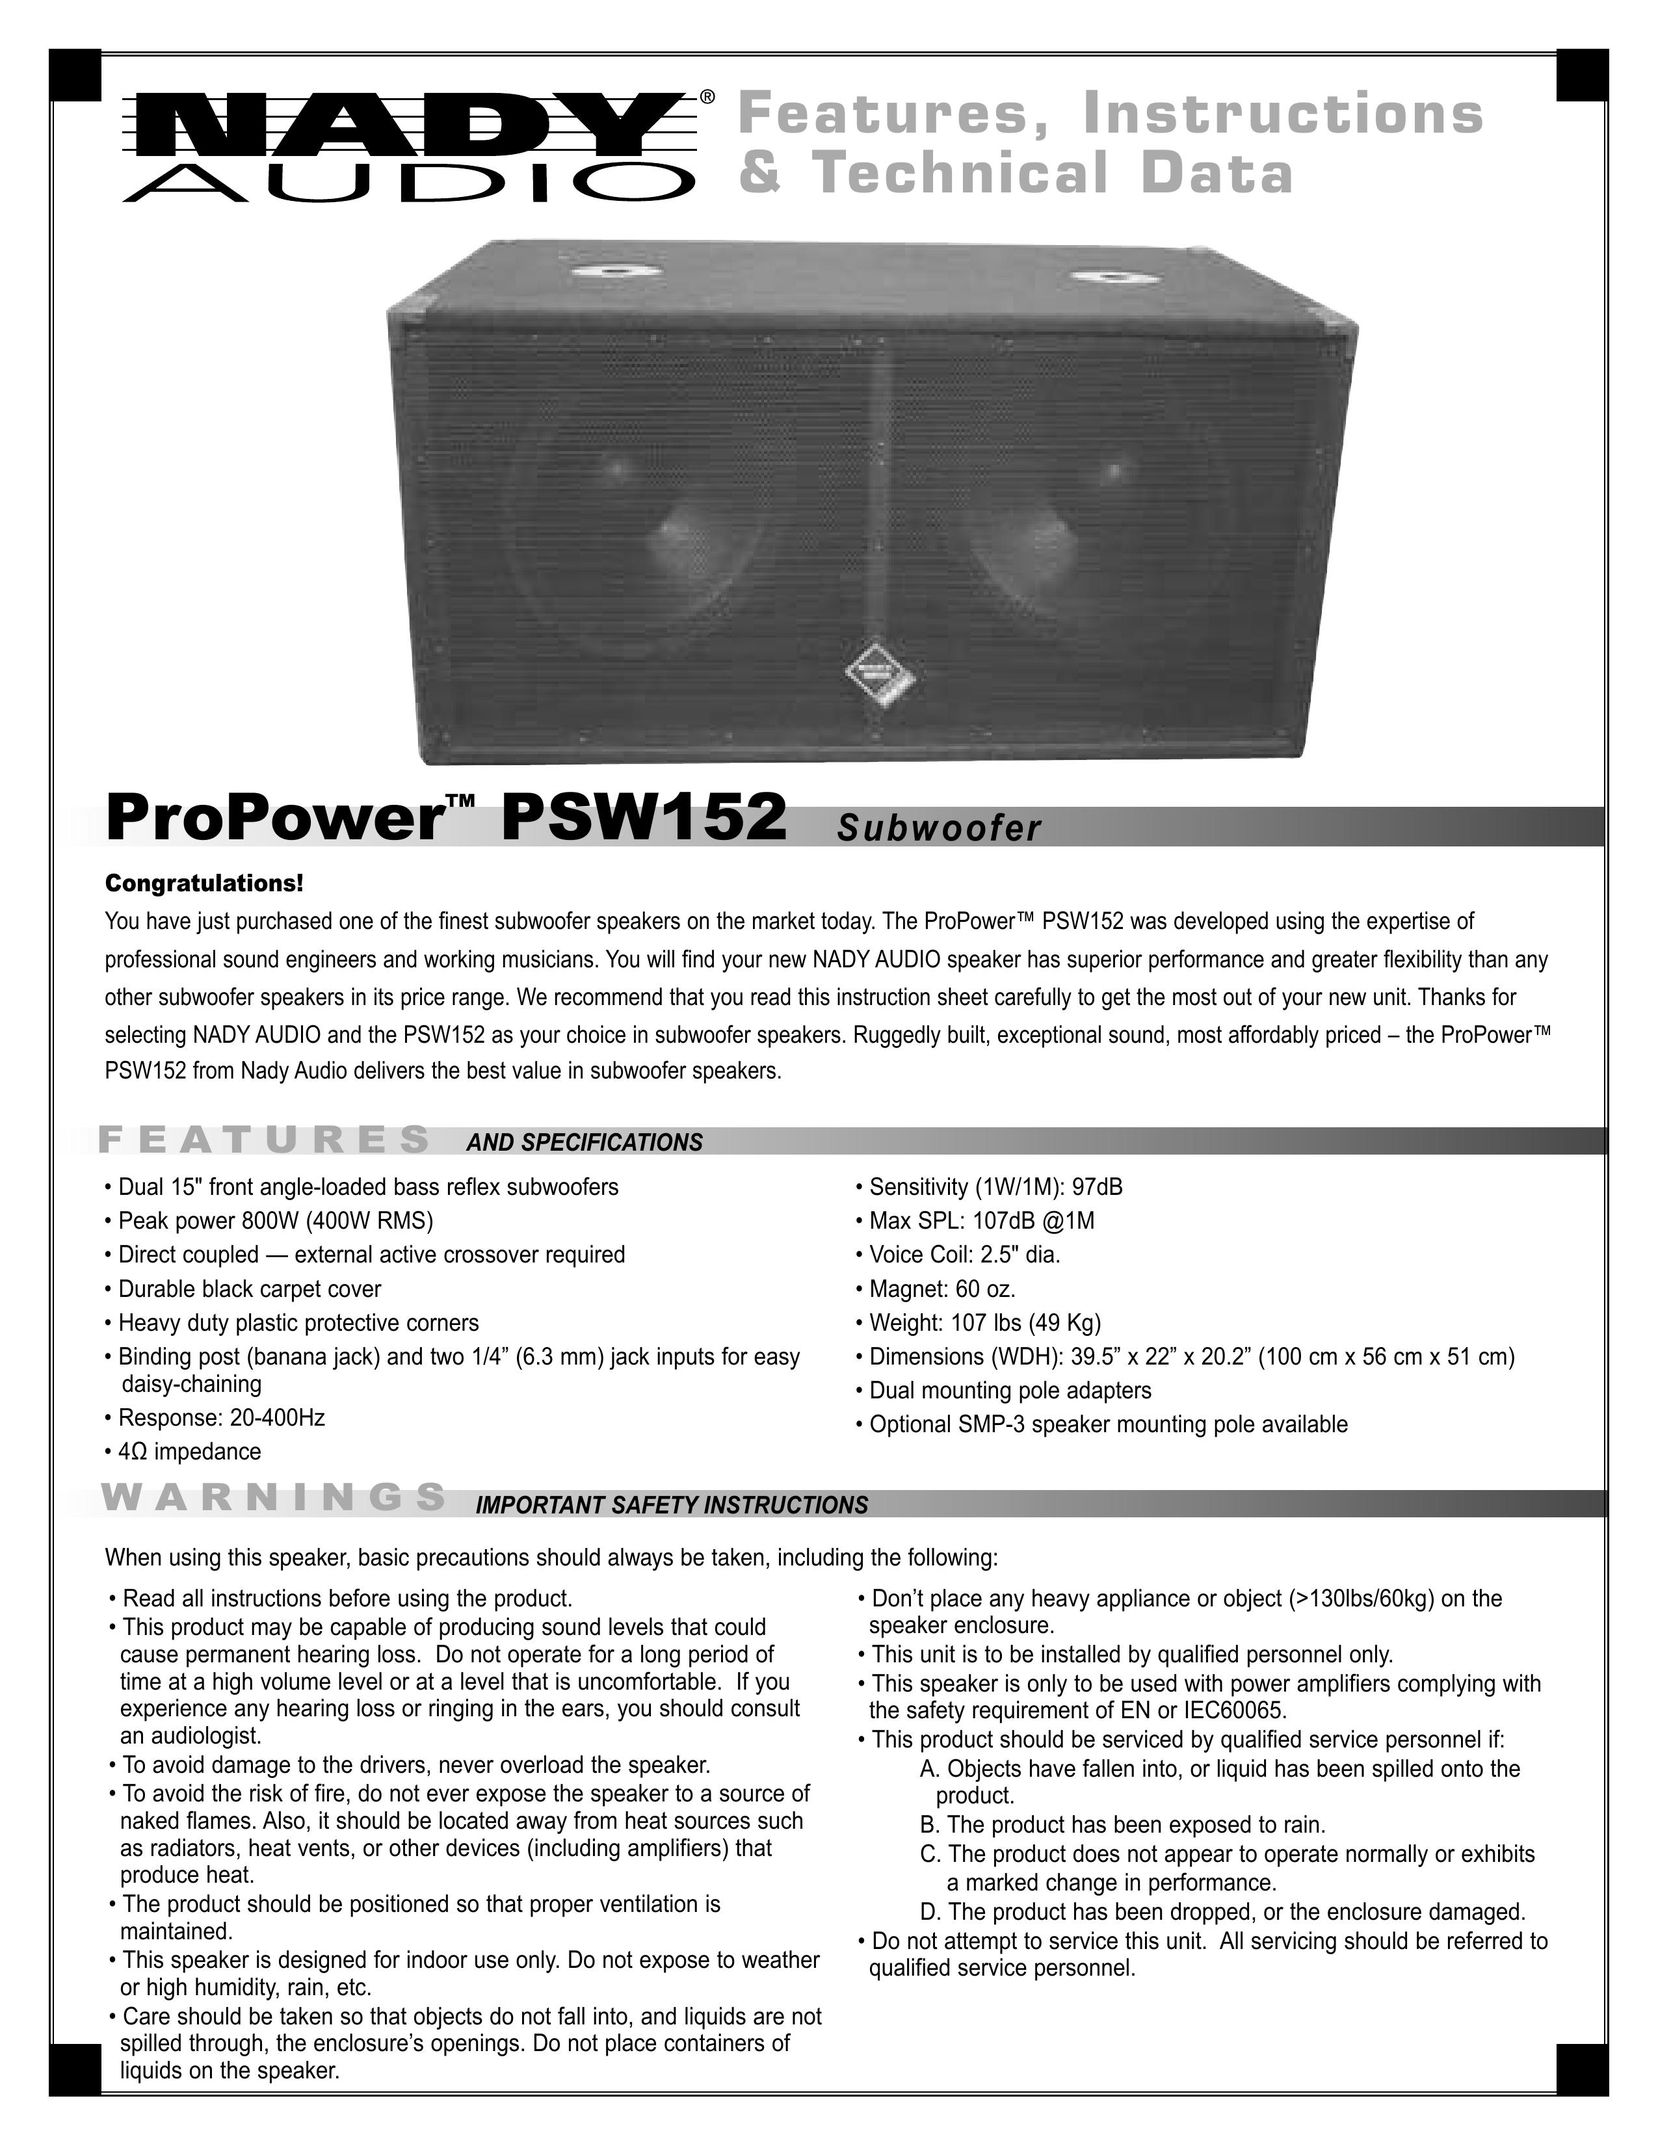 Nady Systems ProPower PSW-152 Car Speaker User Manual